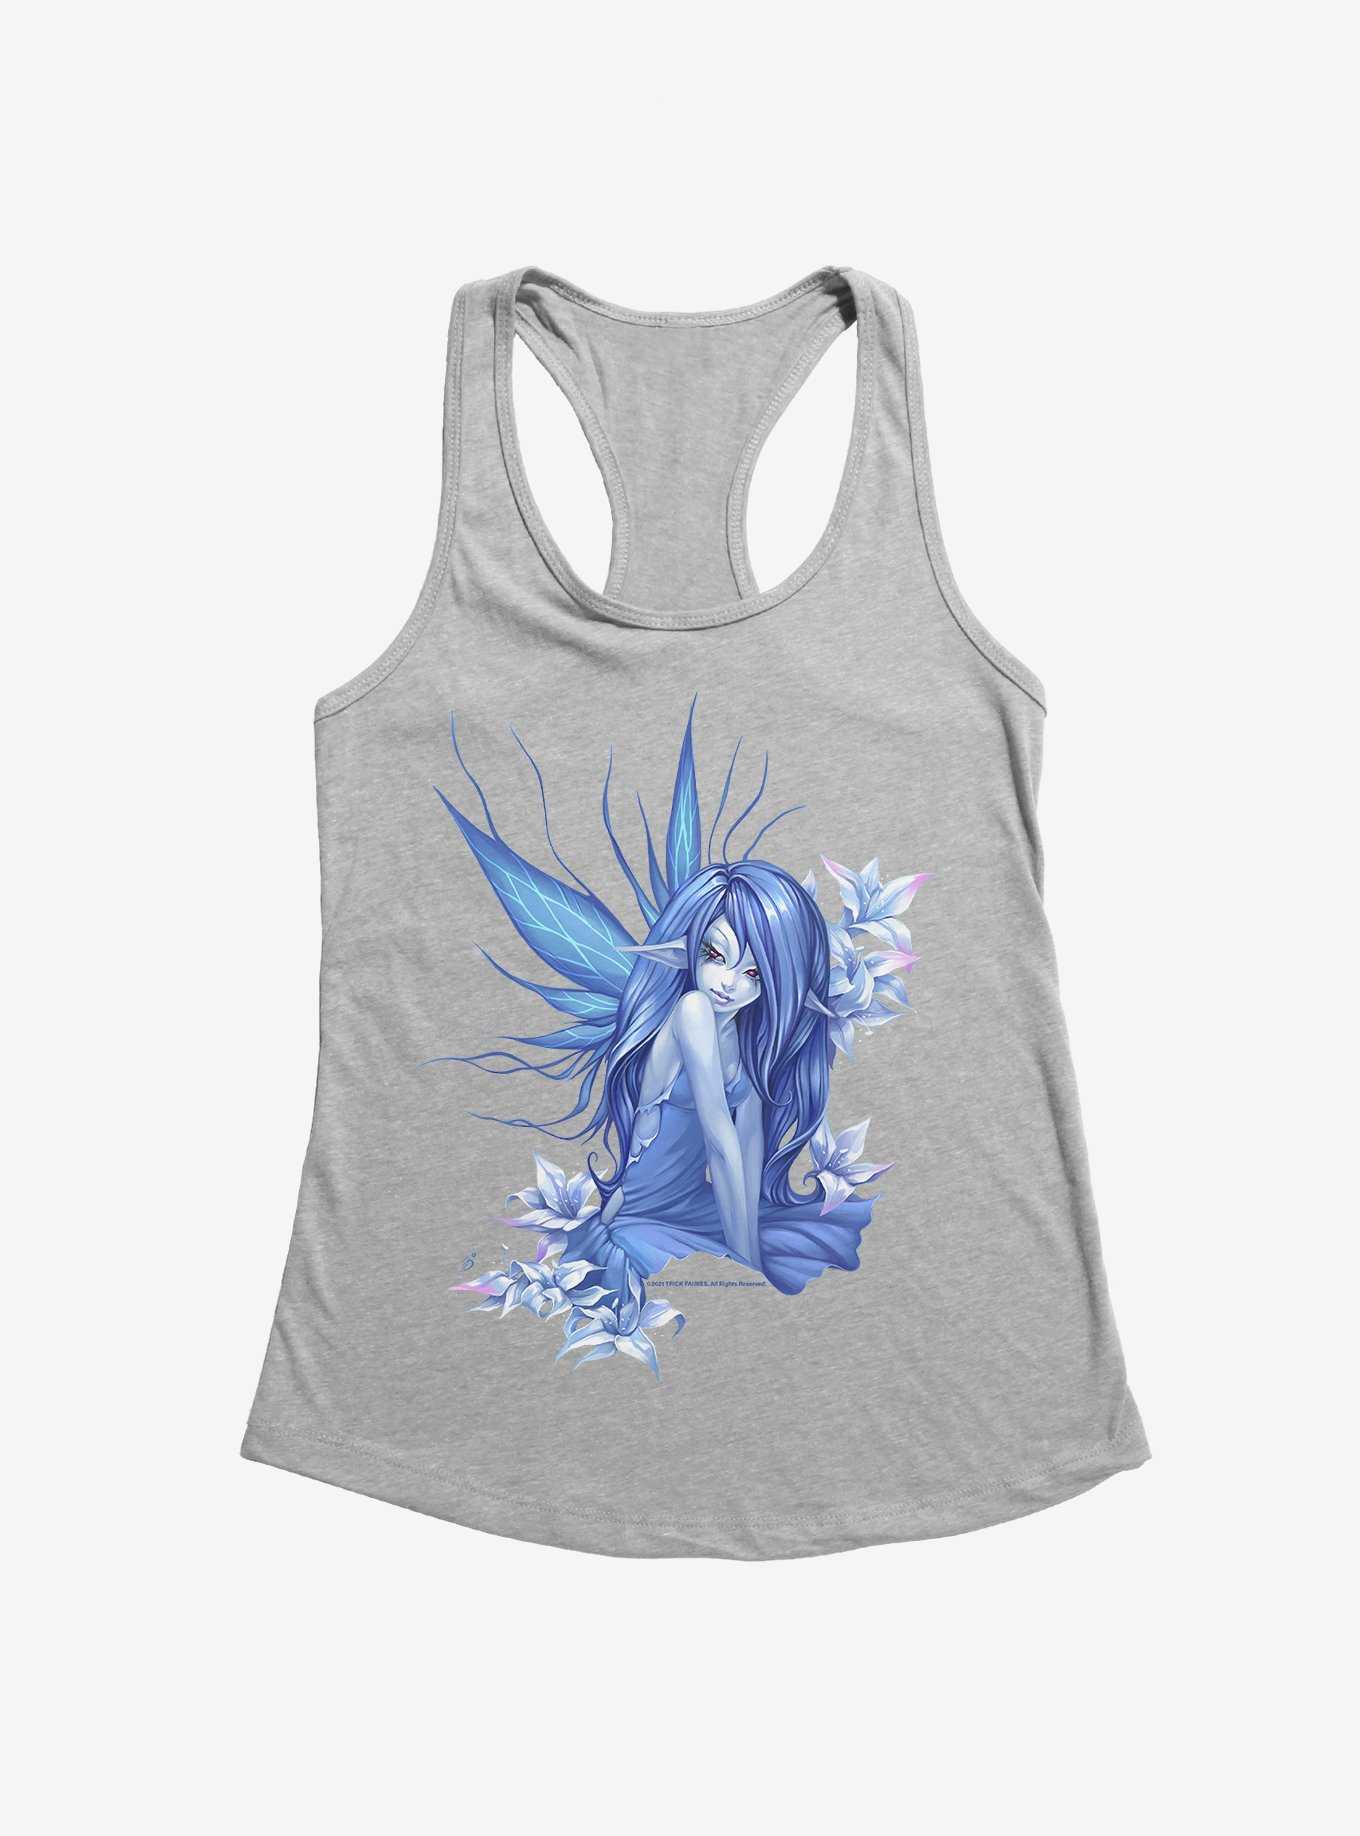 Fairies By Trick Blue Wing Girls Tank, HEATHER, hi-res